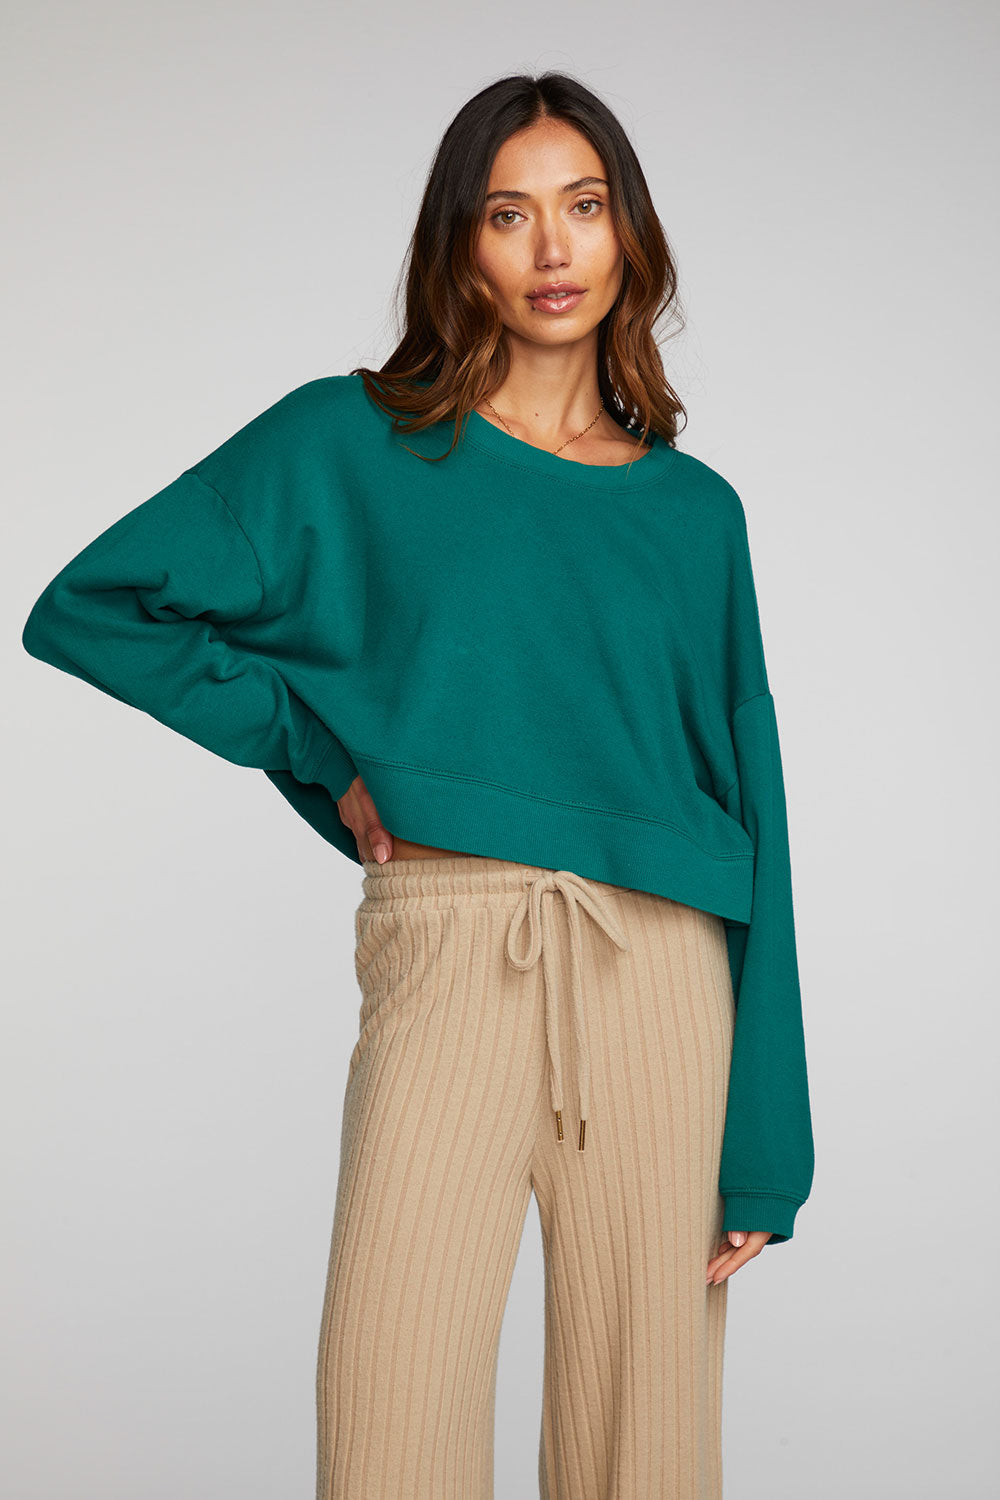 Cotton Fleece Cropped Crewneck Pullover with Rib Womens chaserbrand